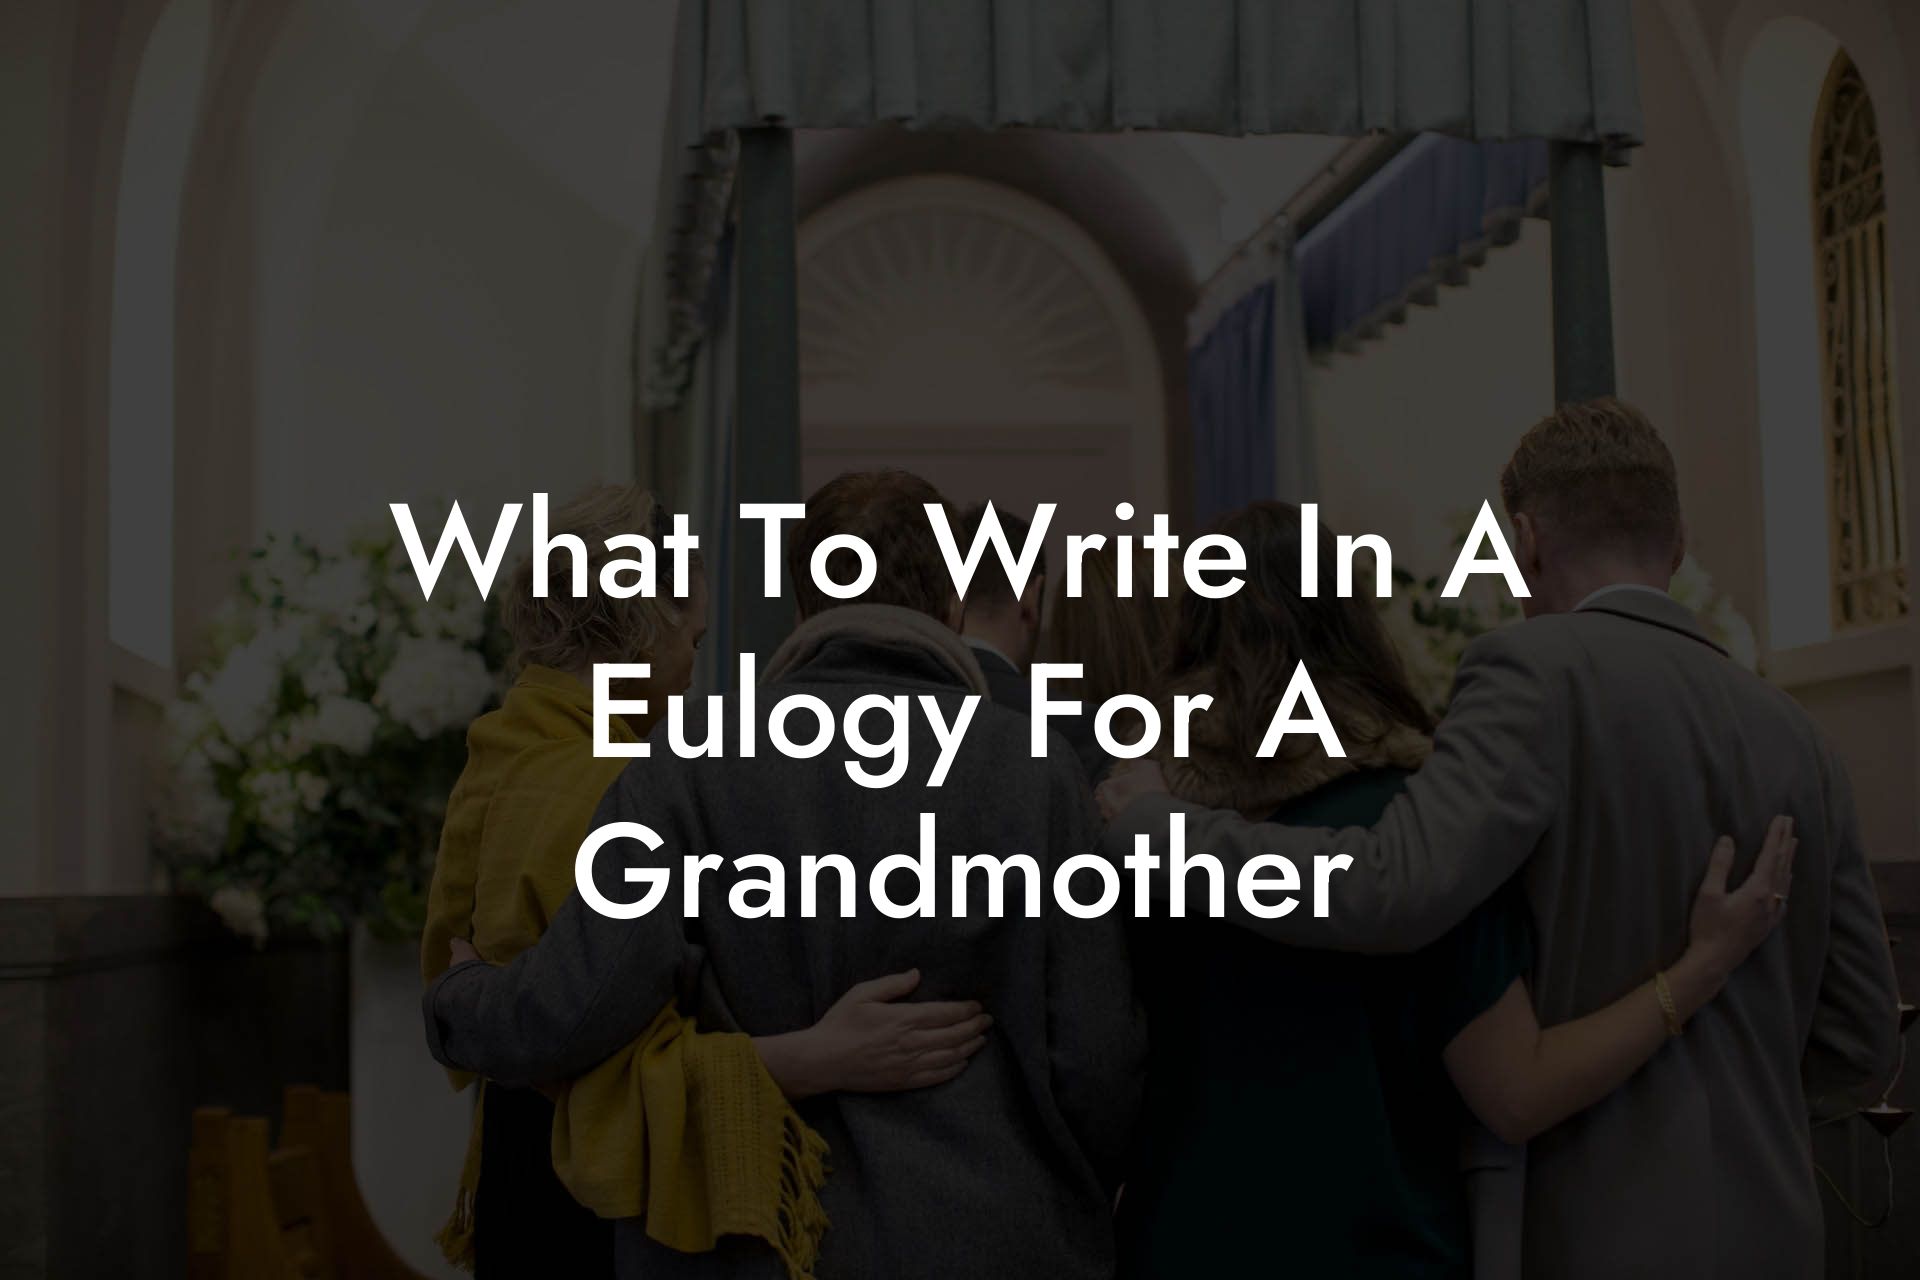 What To Write In A Eulogy For A Grandmother